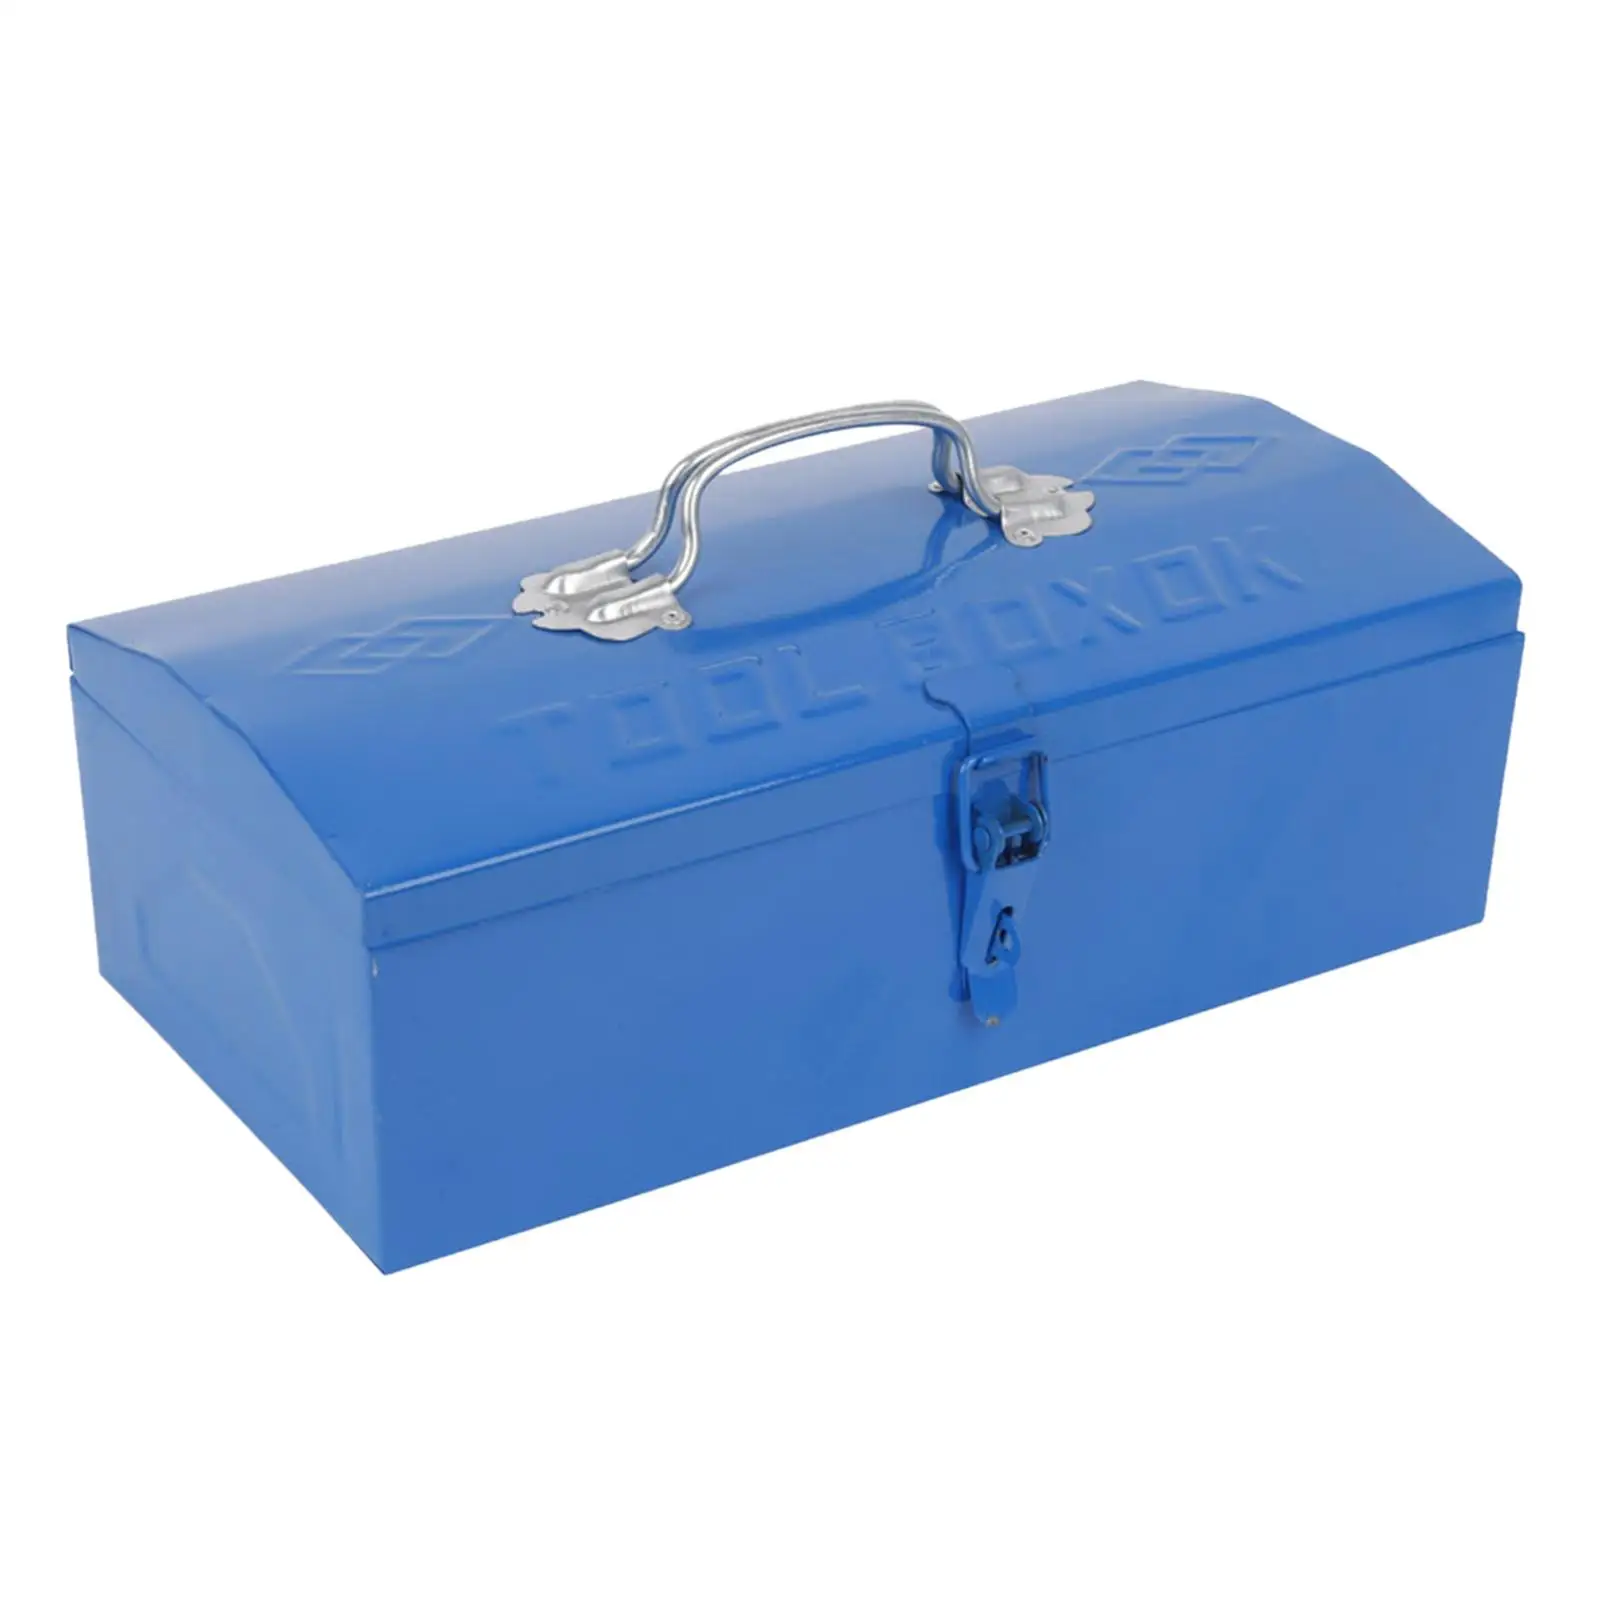 Tool Storage Box Tool Suitcase Organizer with Handle Portable Latch Closure Container Iron Tool Box Tool Case for Home Workshop